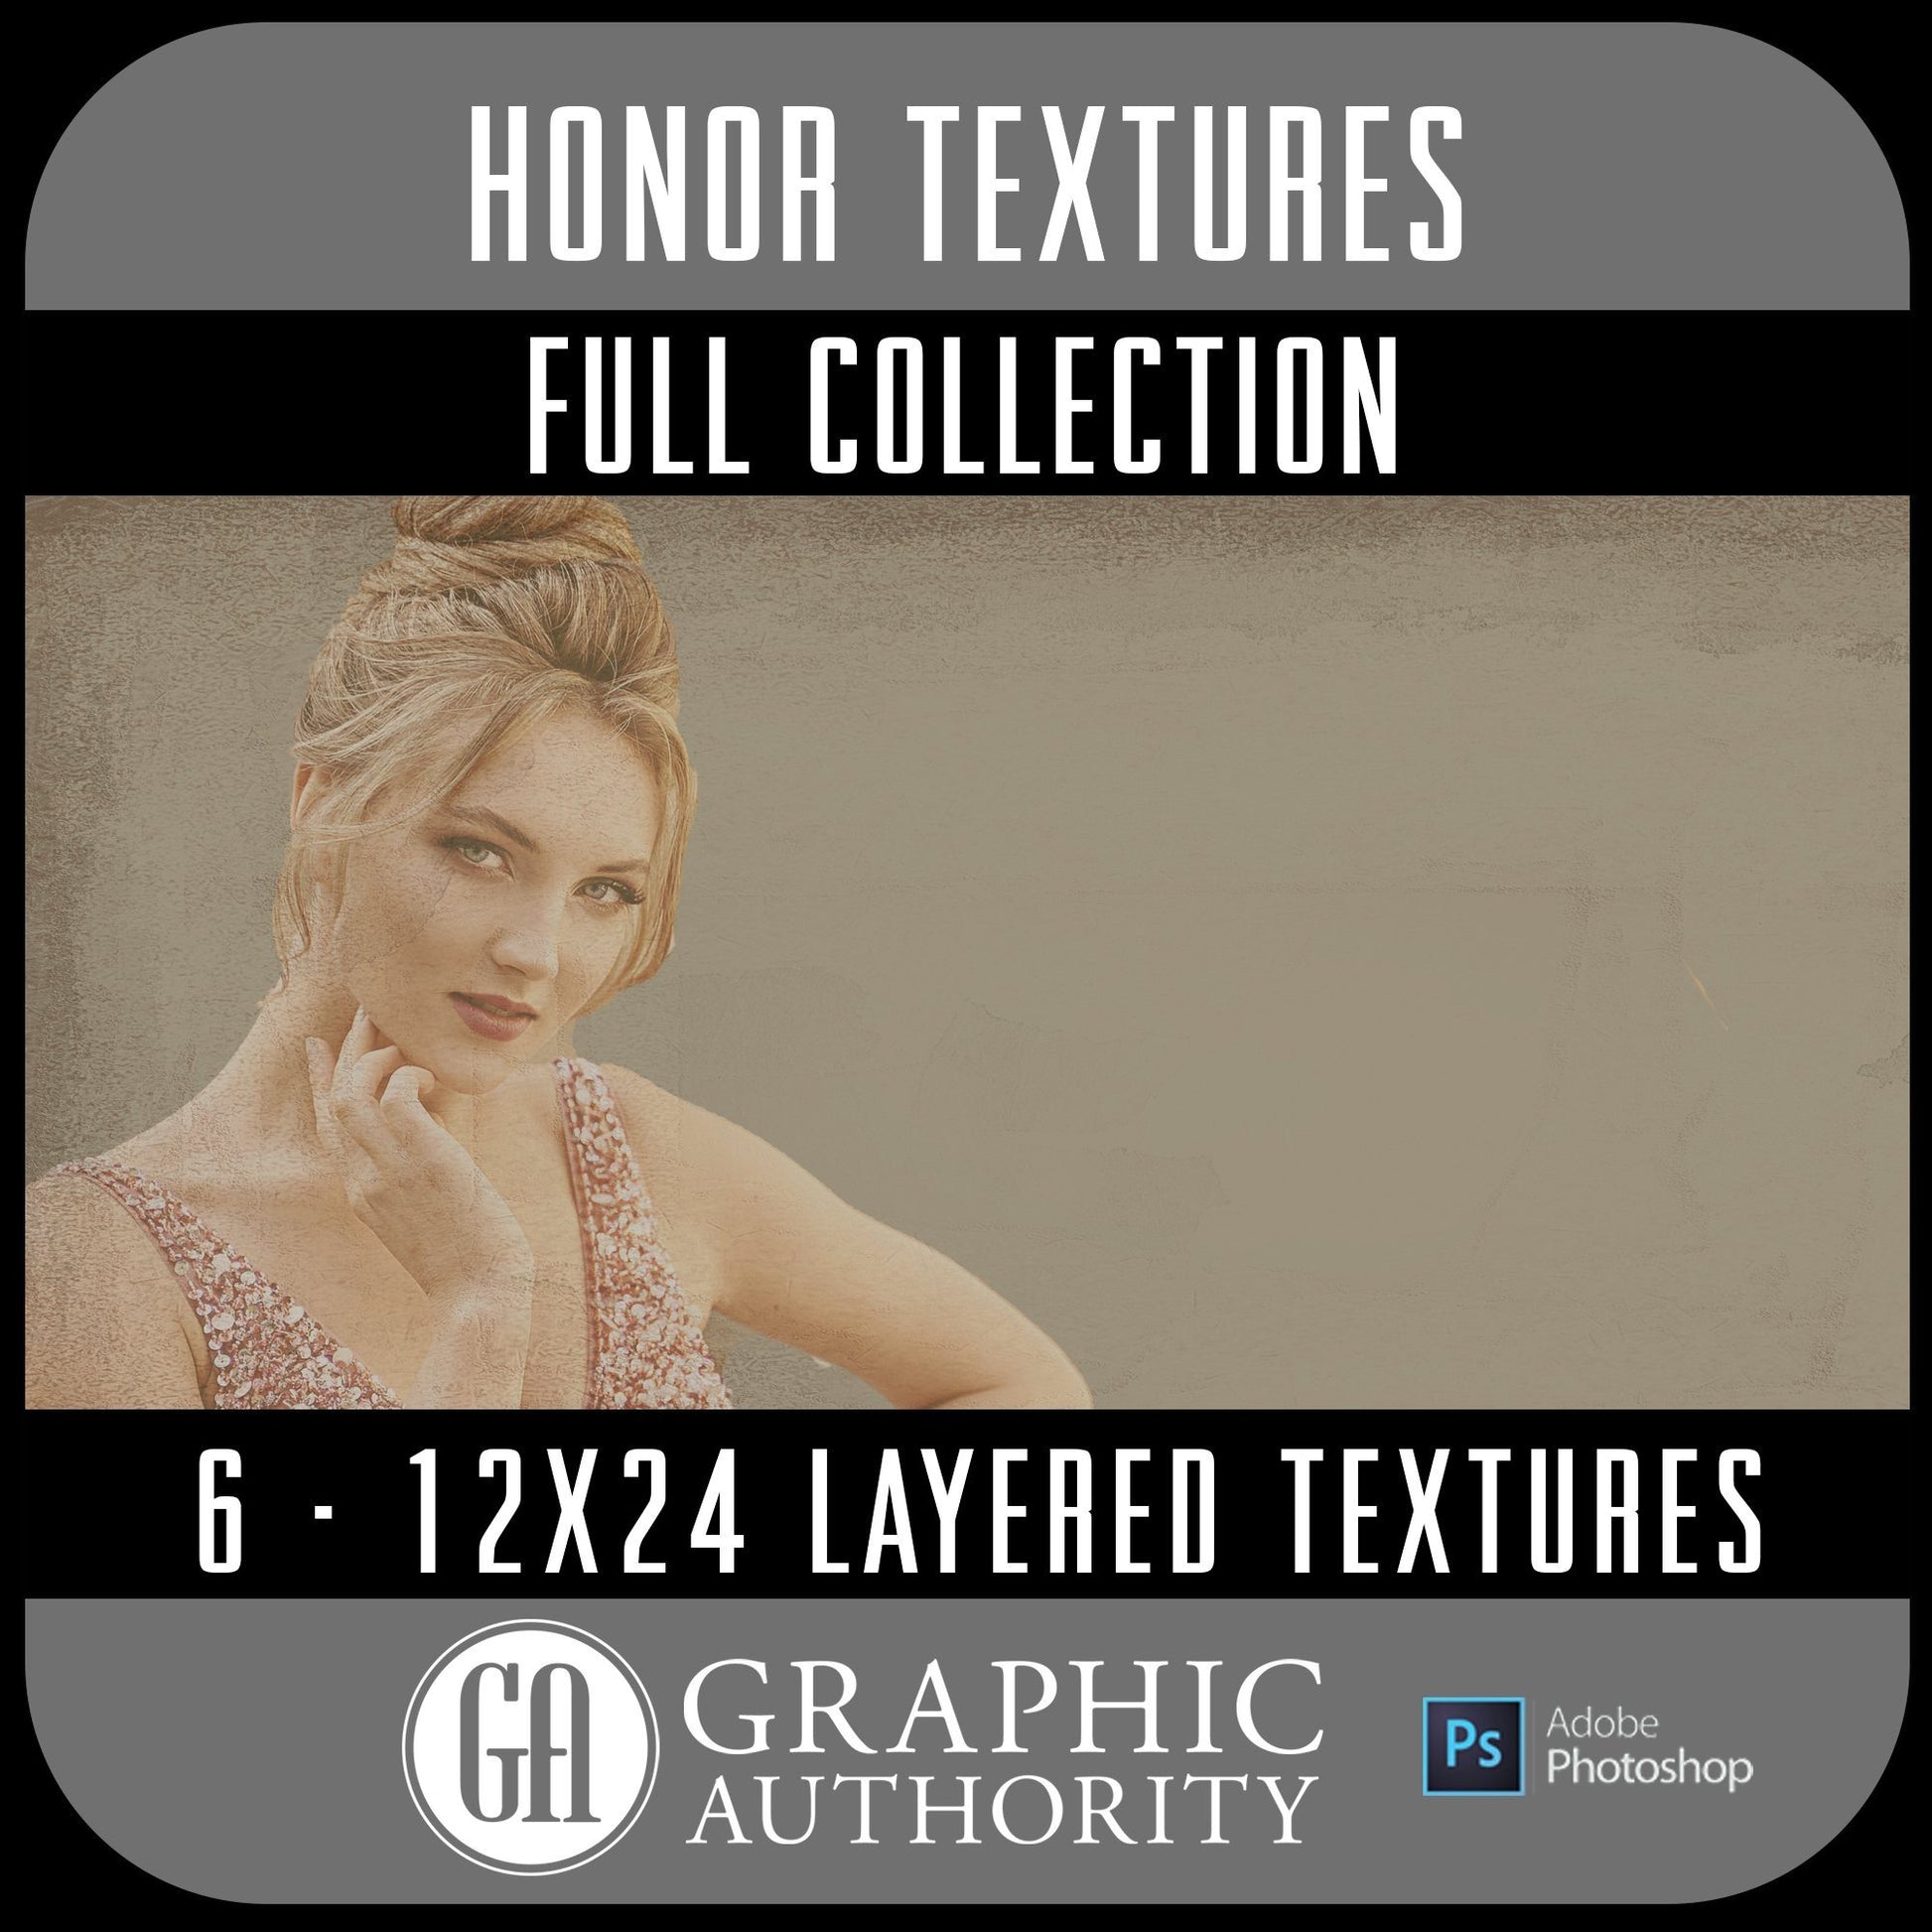 Honor - 12x24 Layered Textures - Full Collection-Photoshop Template - Graphic Authority